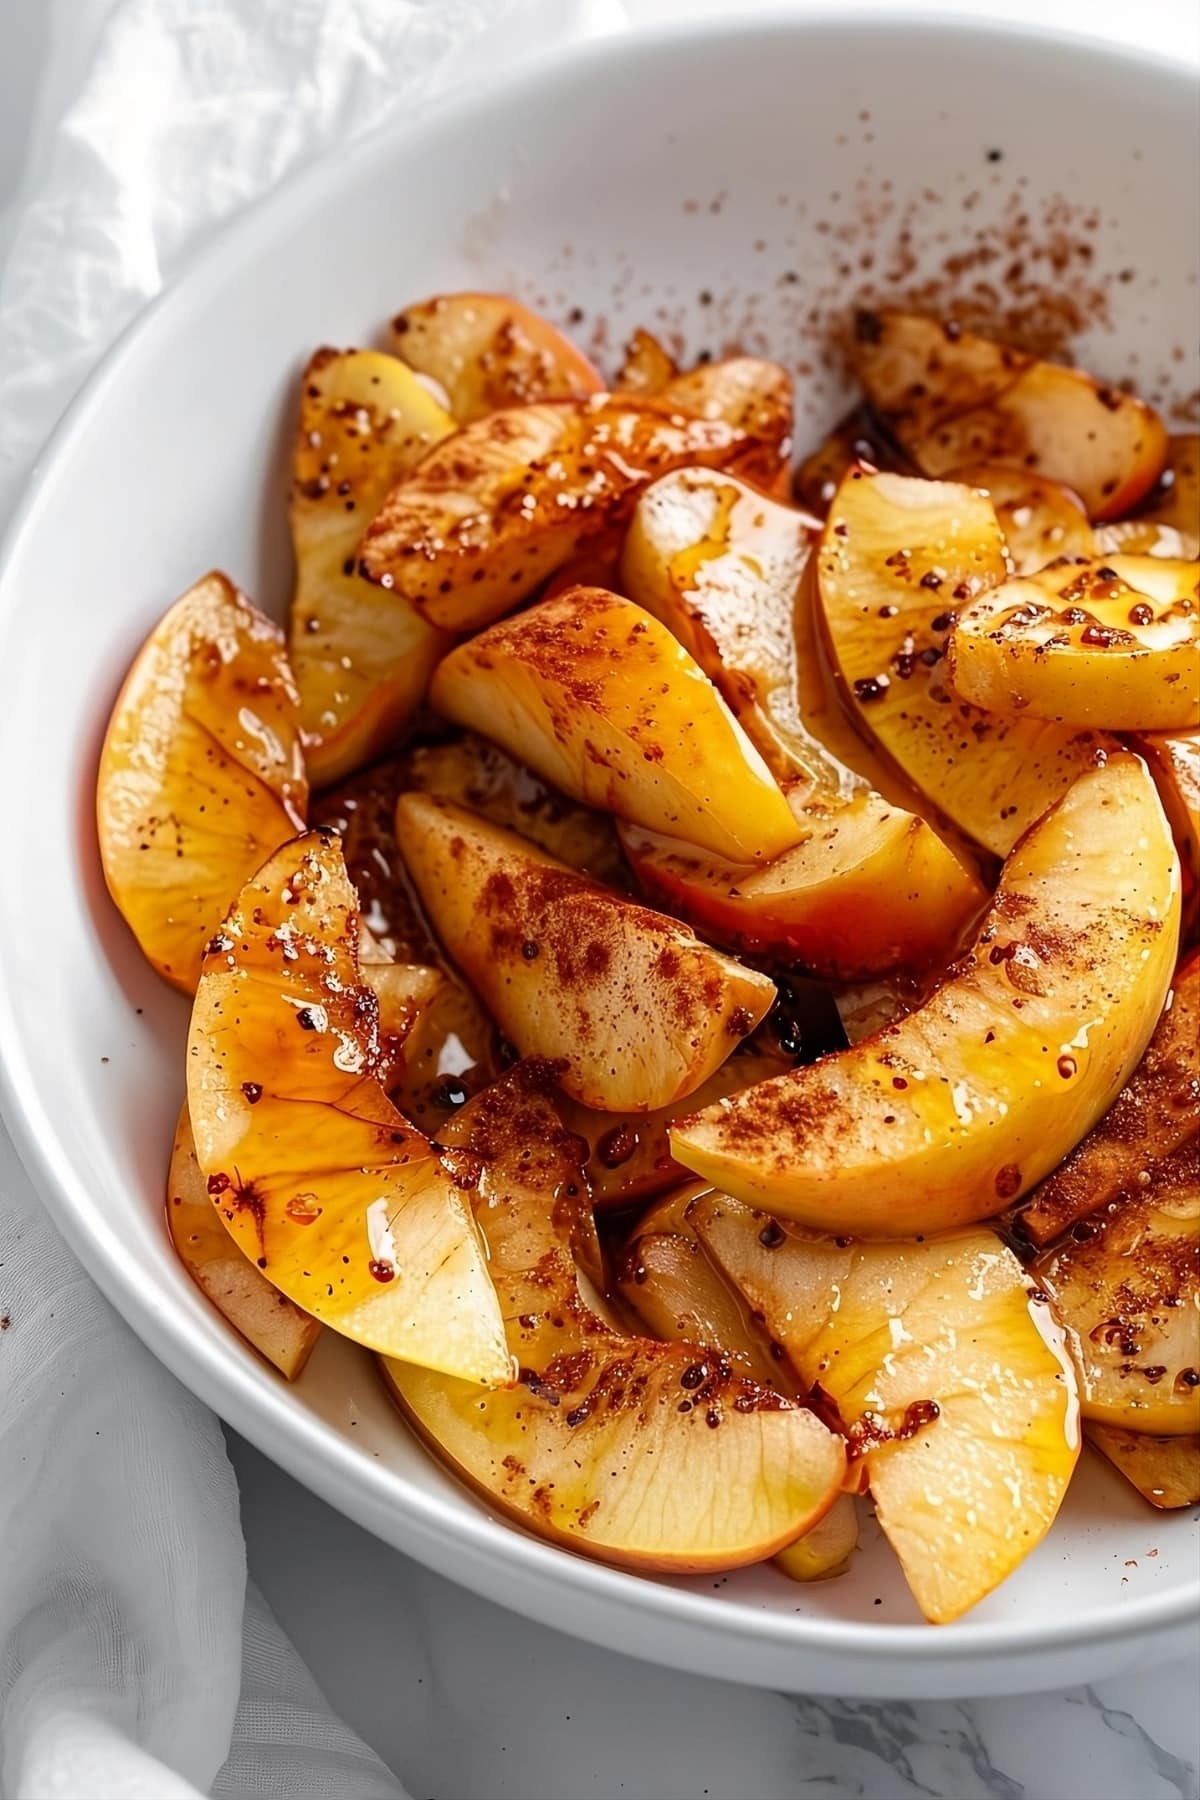 Baked apples with cinnamon and sugar on a bowl.